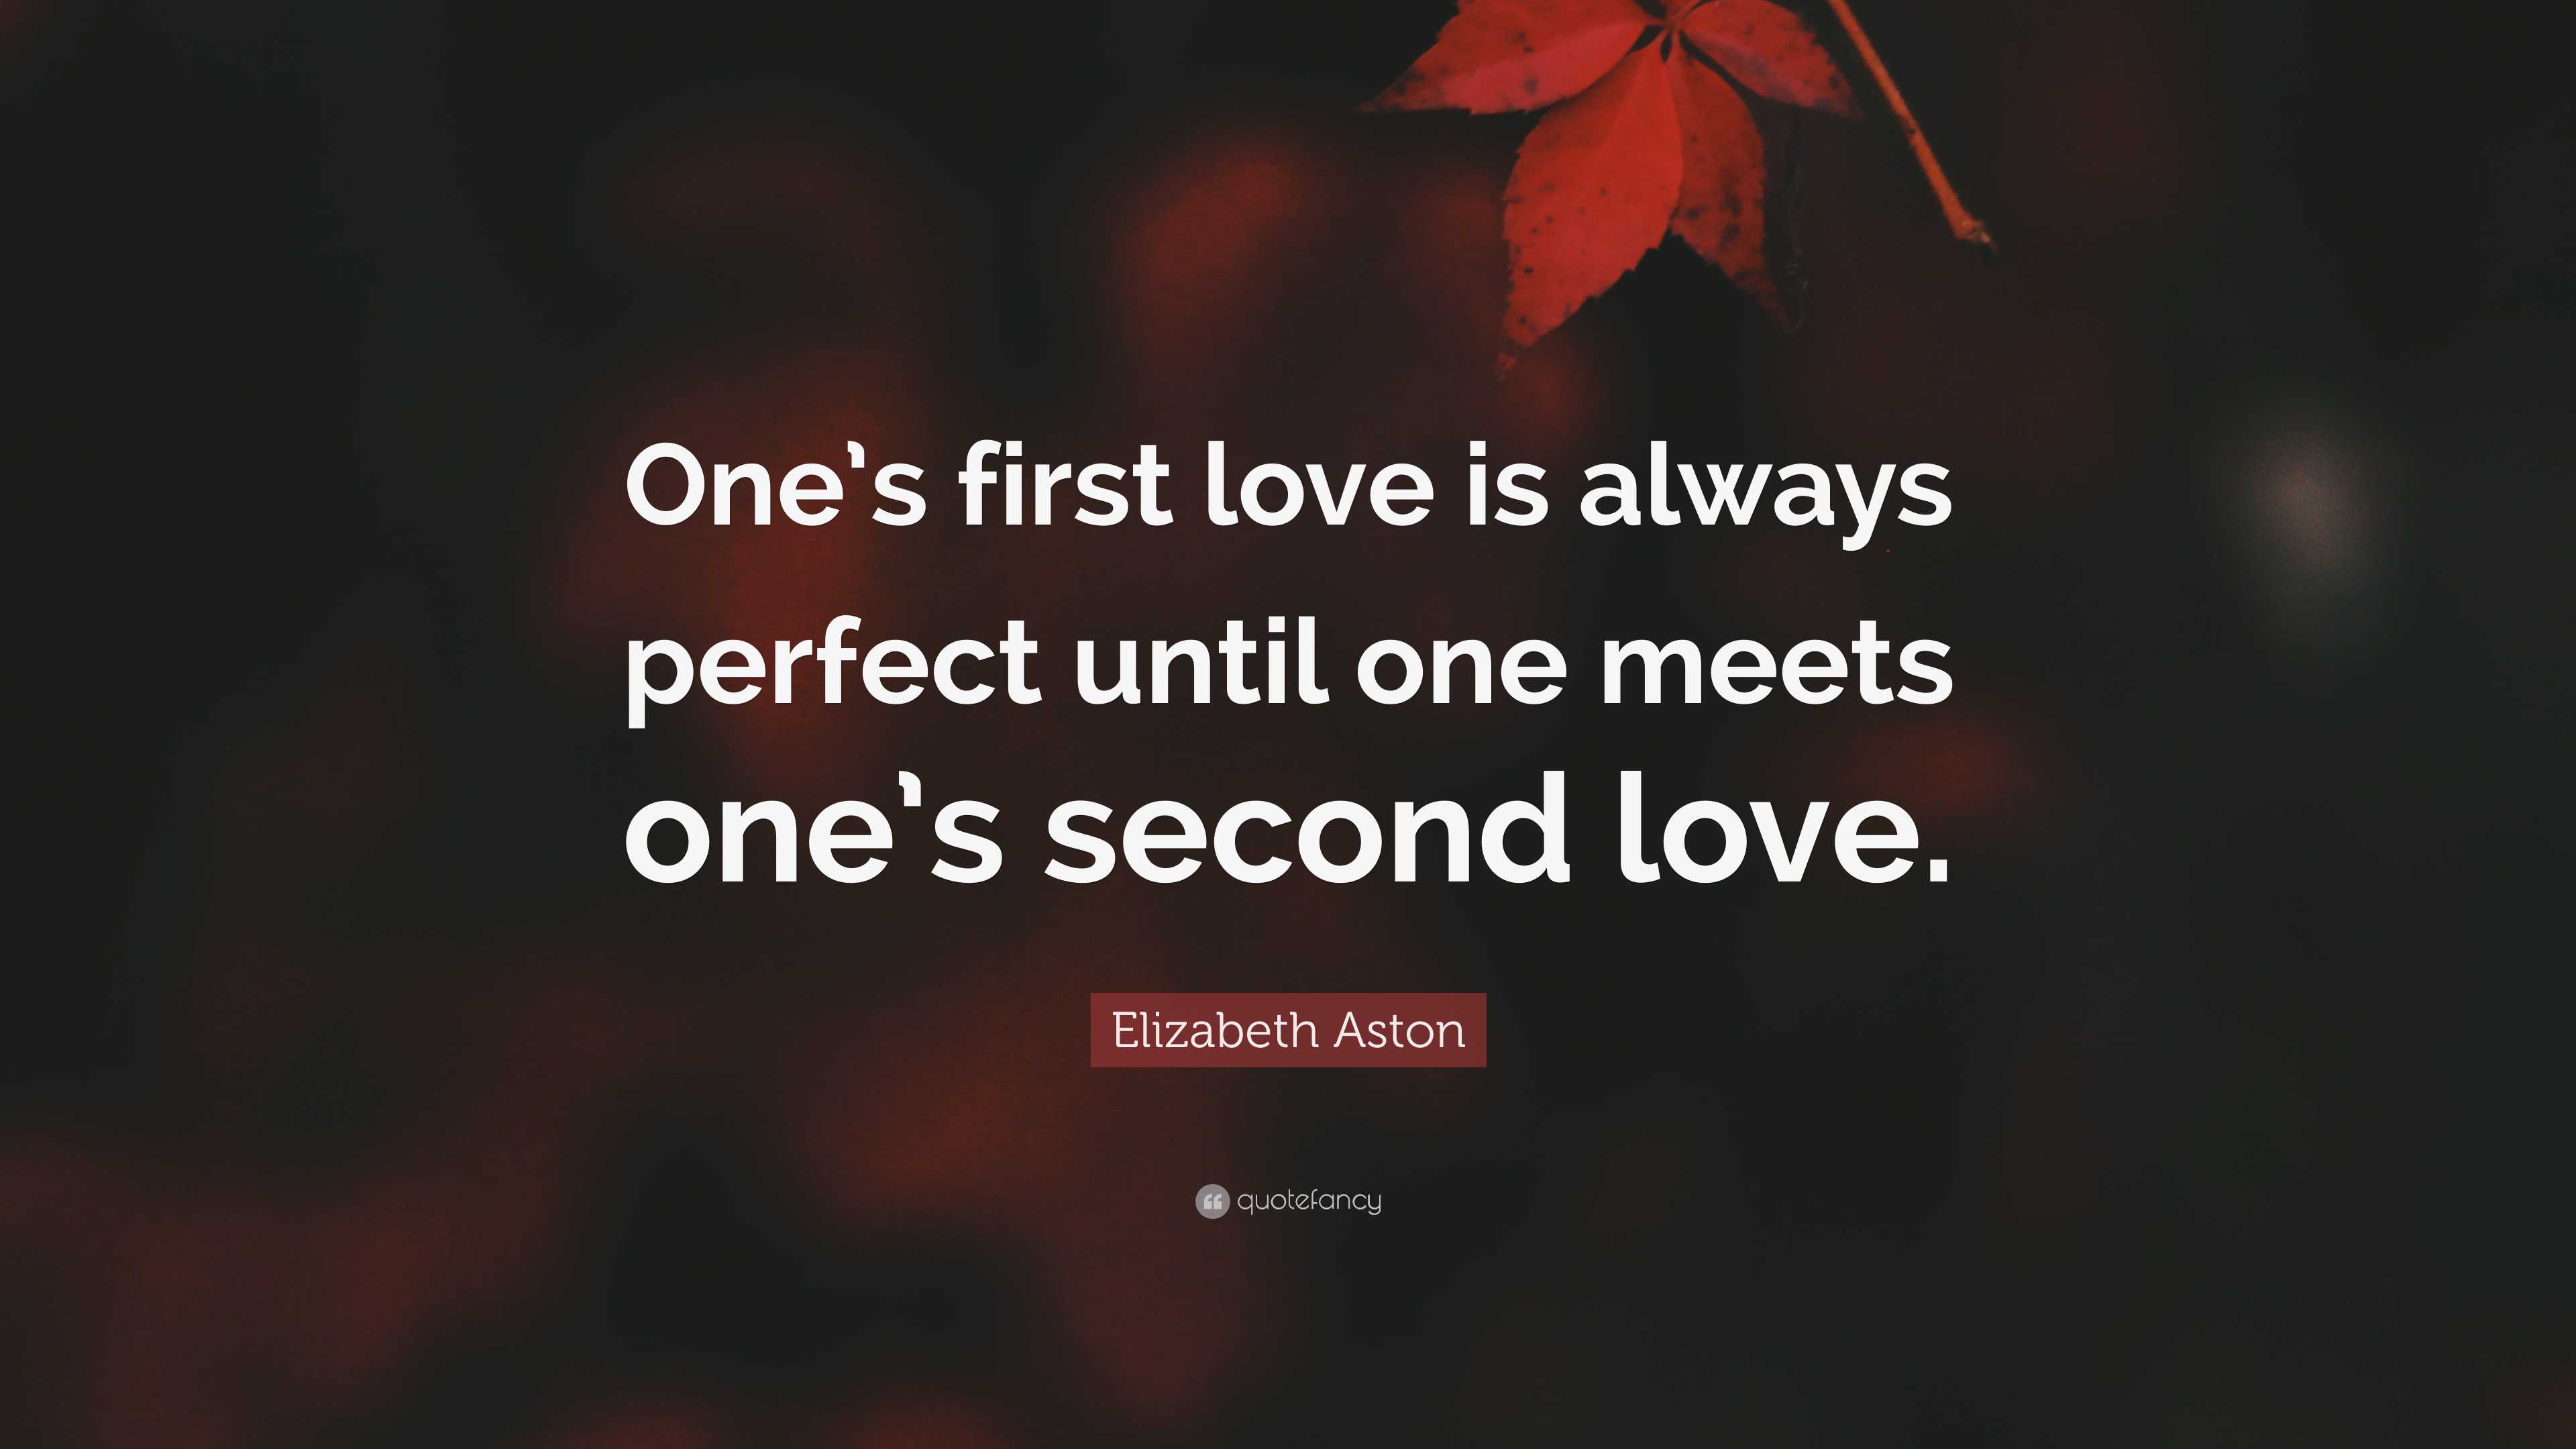 Elizabeth Aston Quote: “One's first love is always perfect until